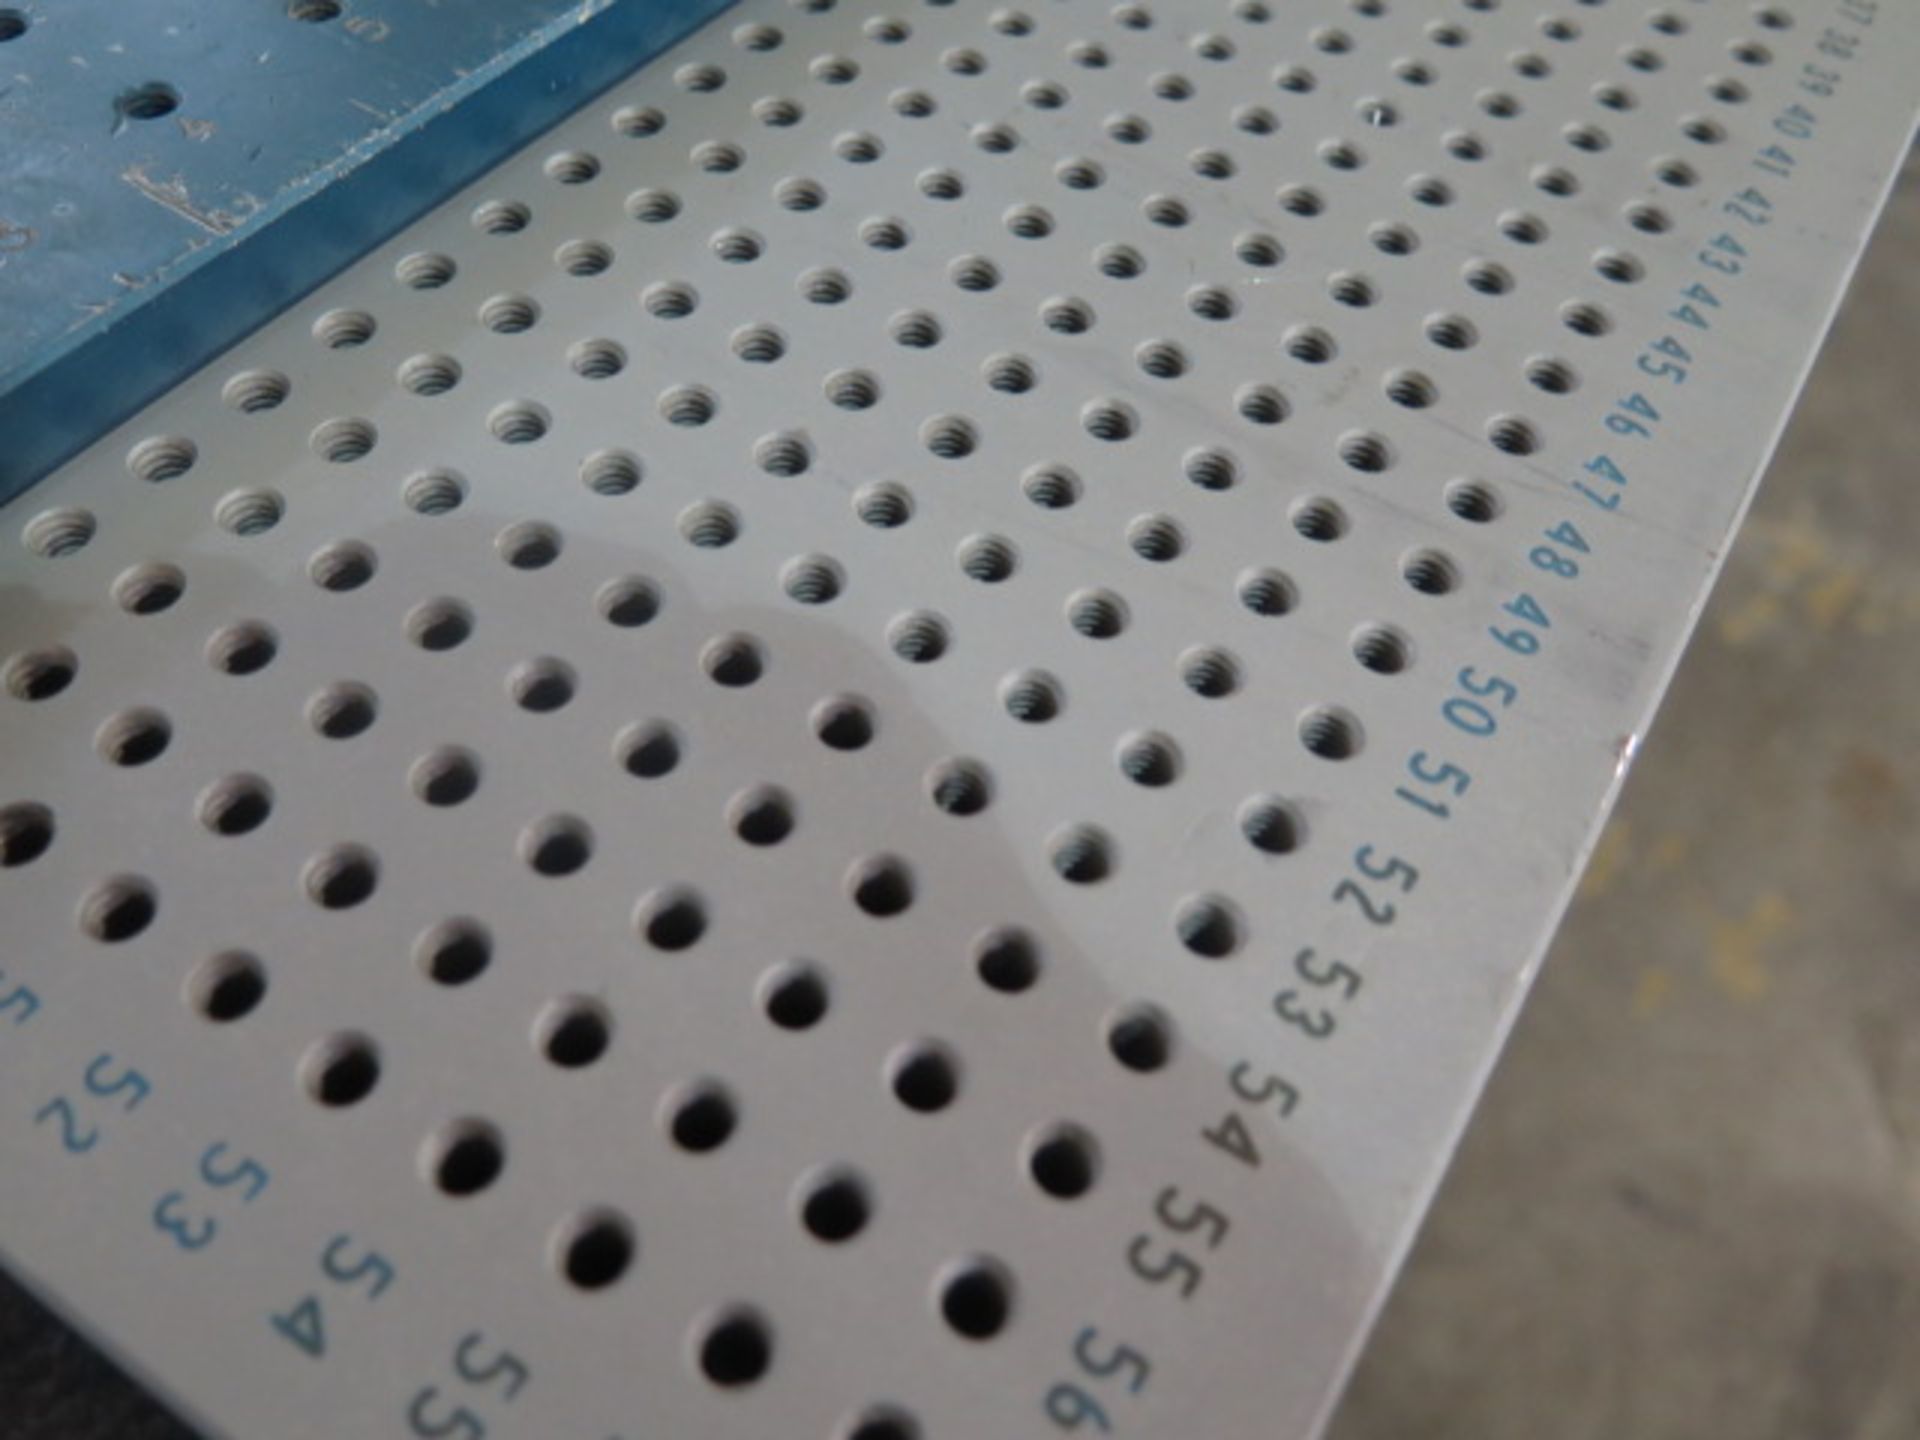 30" x 30" and 24" x 32" Aluminum Tapper-Hole CMM Fixture Plates (2) (SOLD AS-IS - NO WARRANTY) - Image 4 of 10